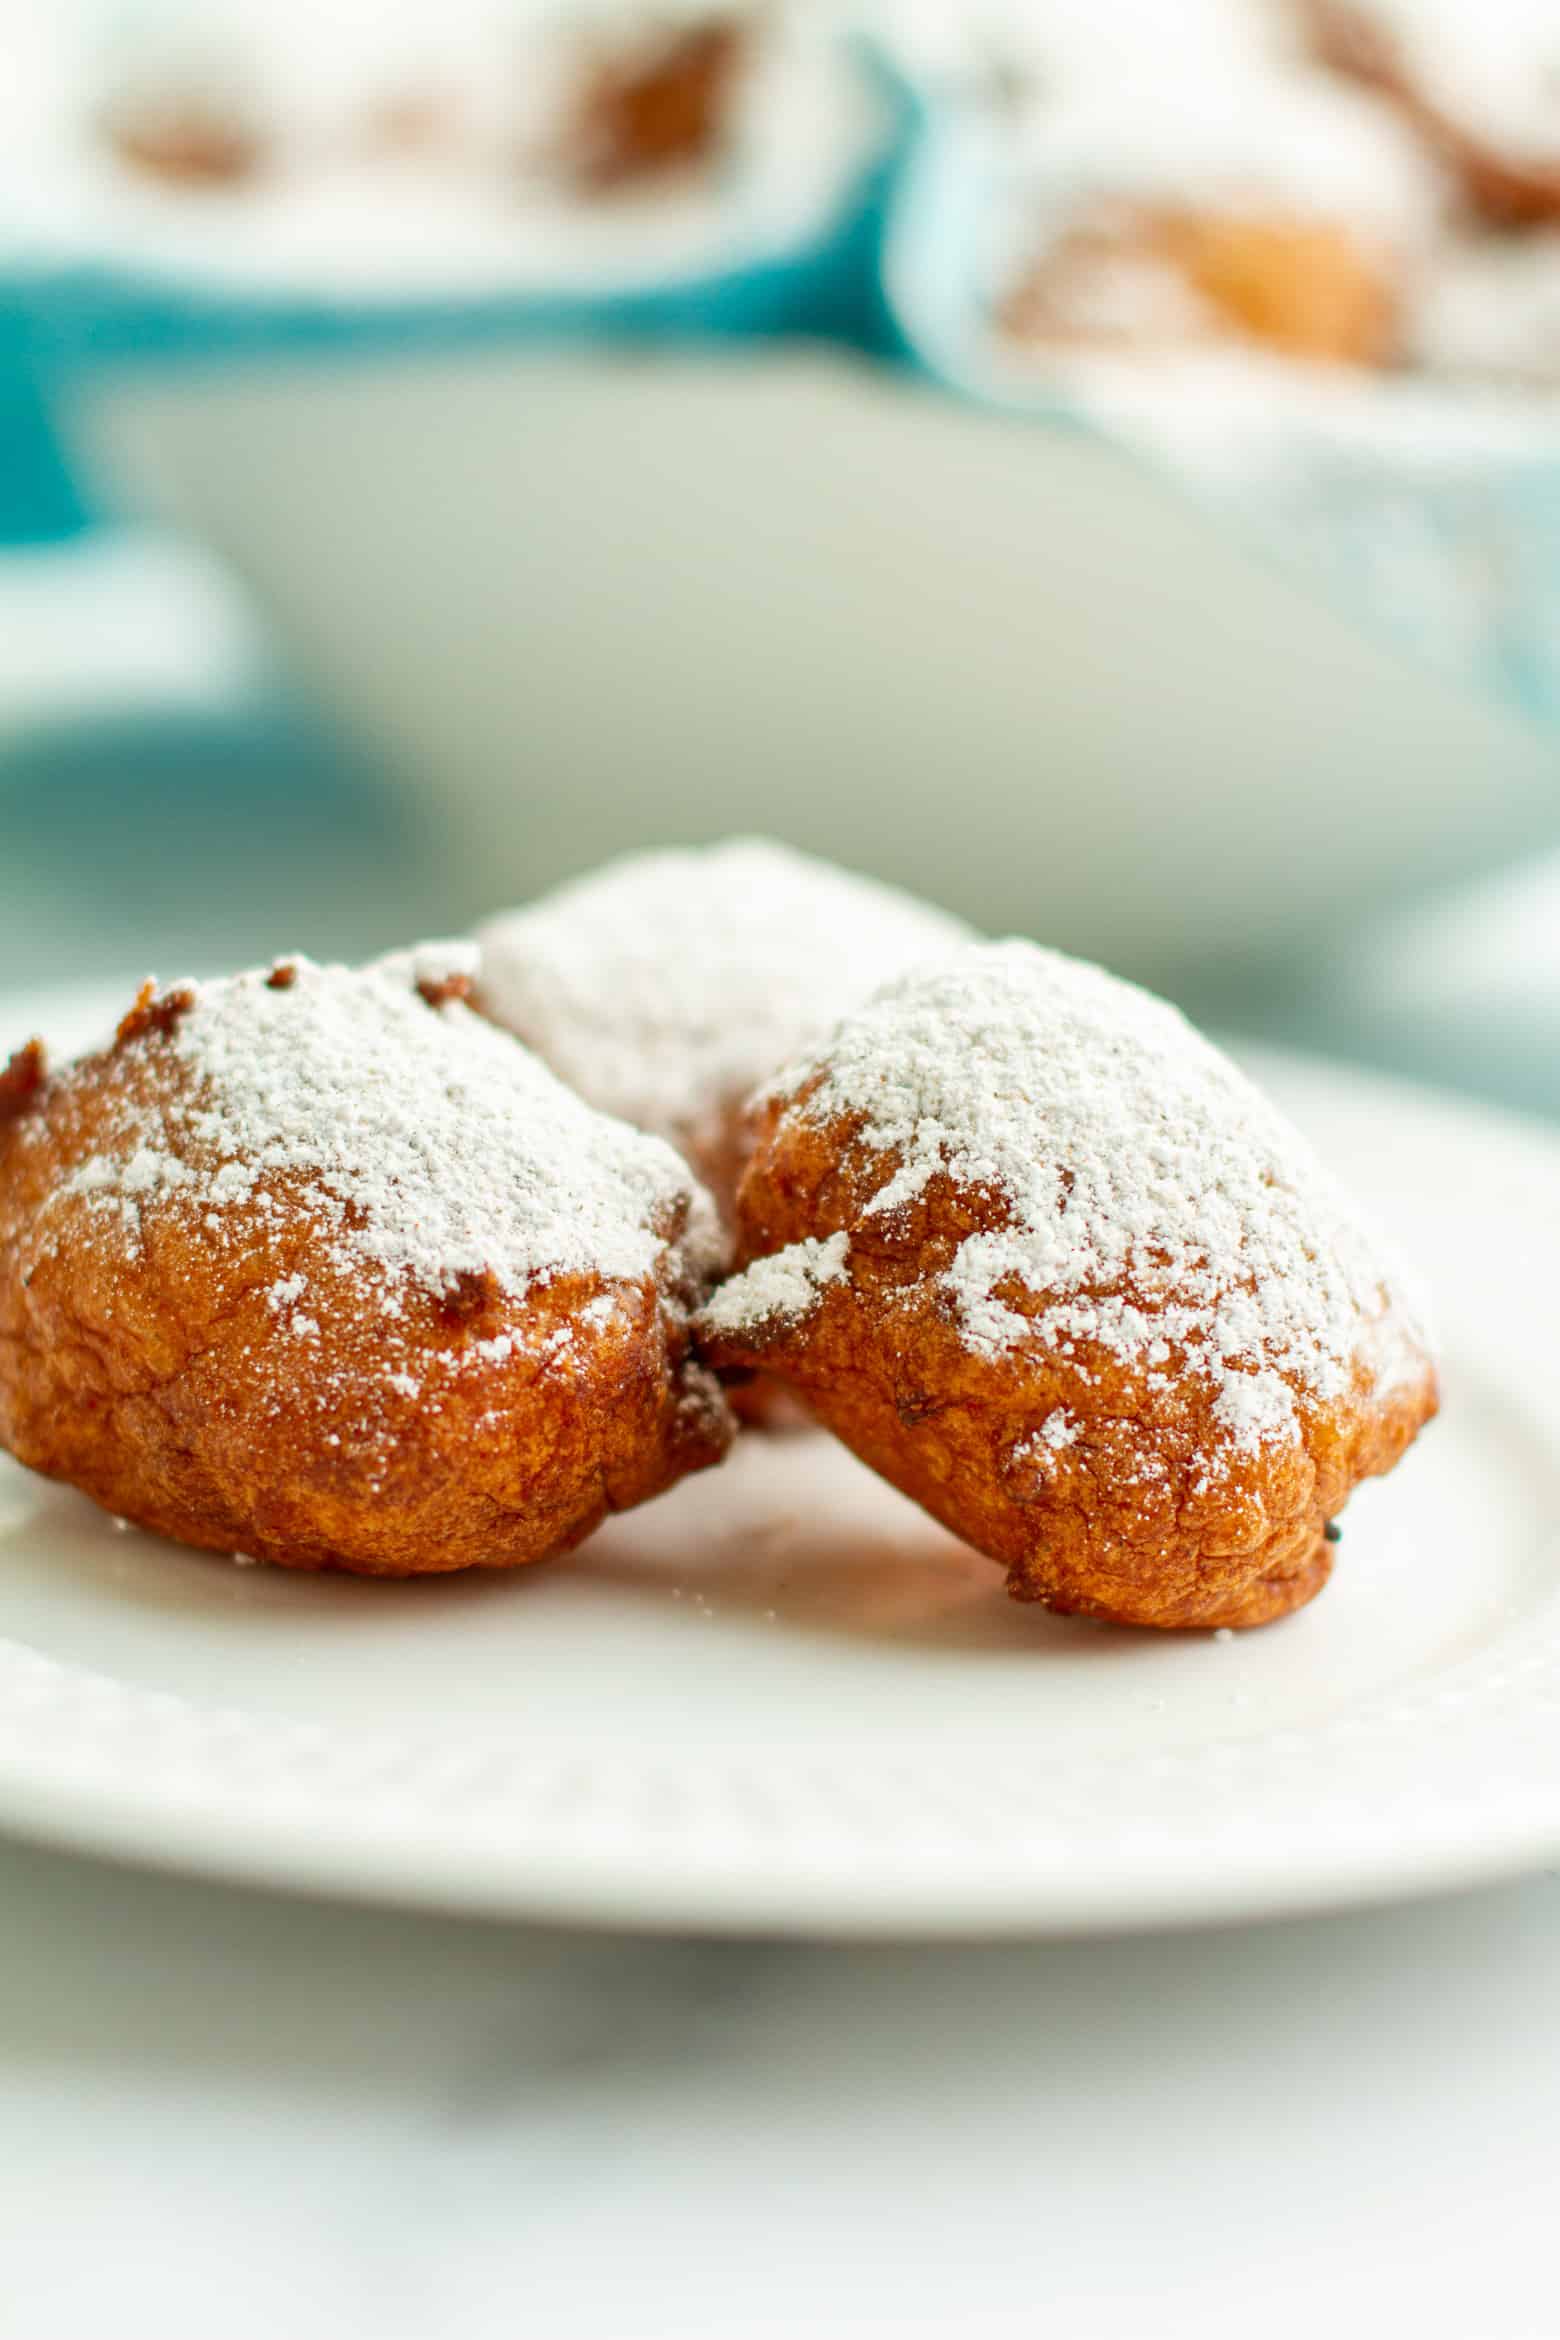 New Orleans Calas dusted with powdered sugar on a plate.